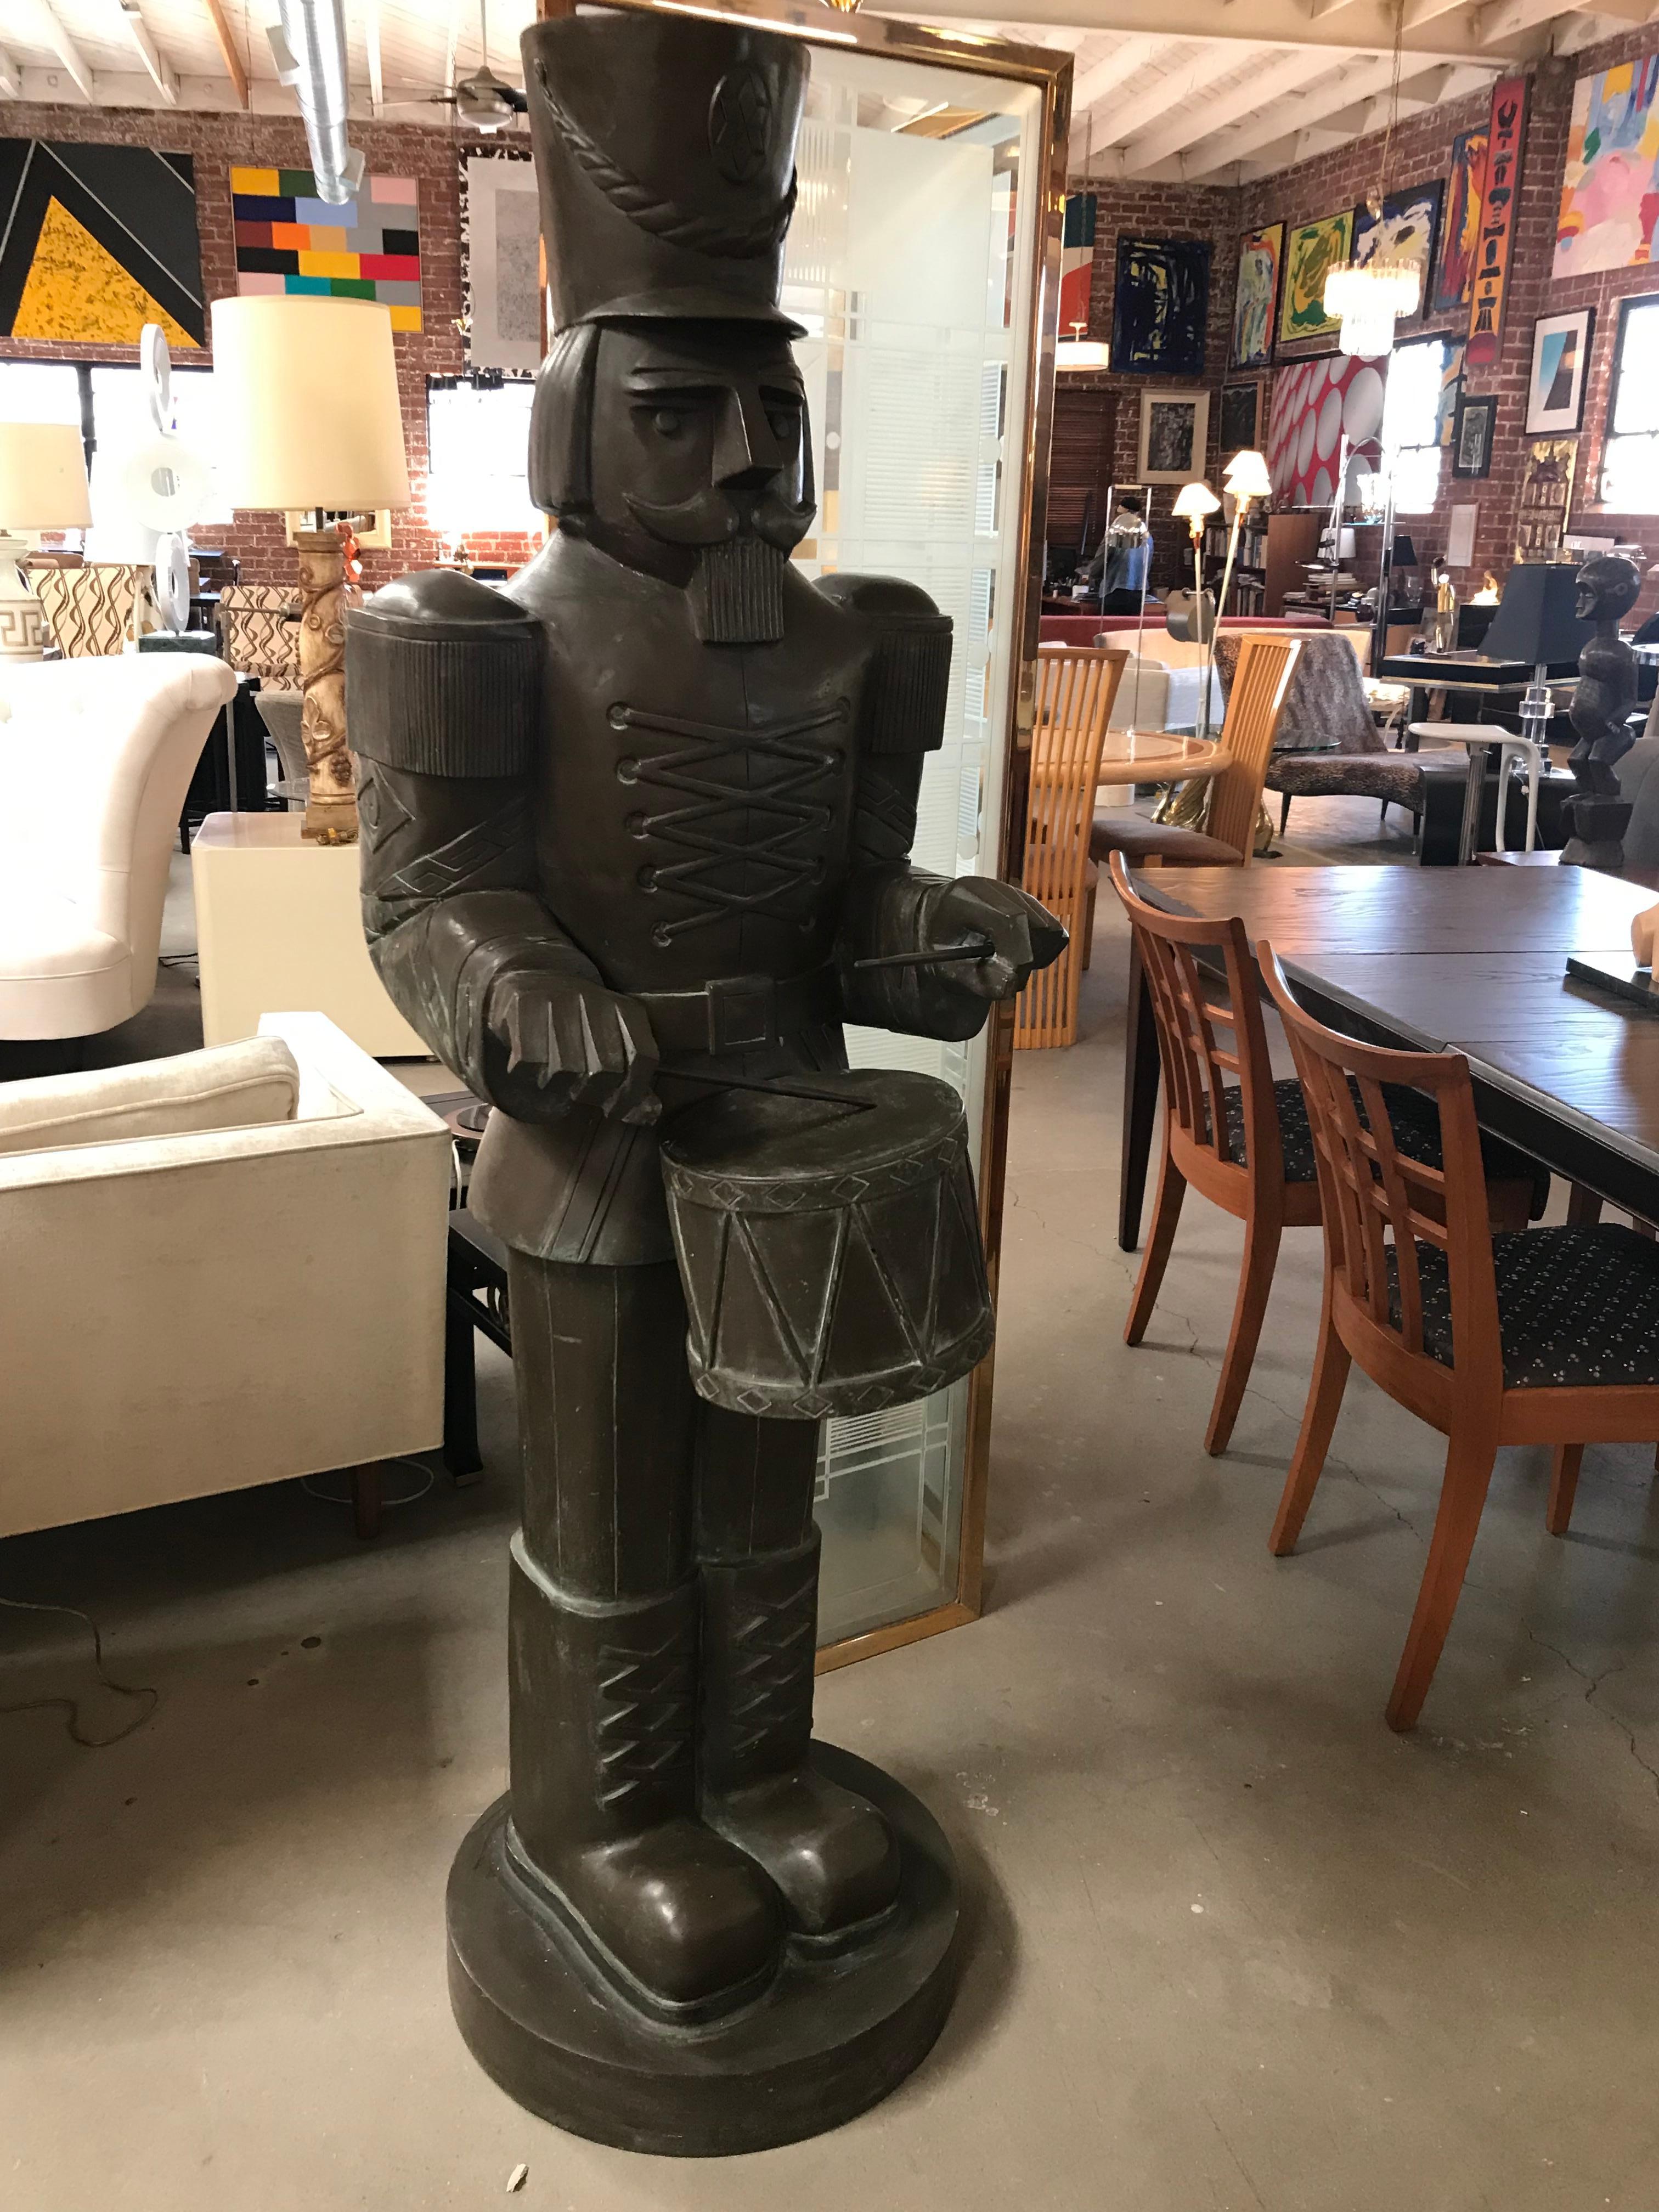 Large resin statue of a hussar drummer with very accurate details.
I had probably been made for a movie.